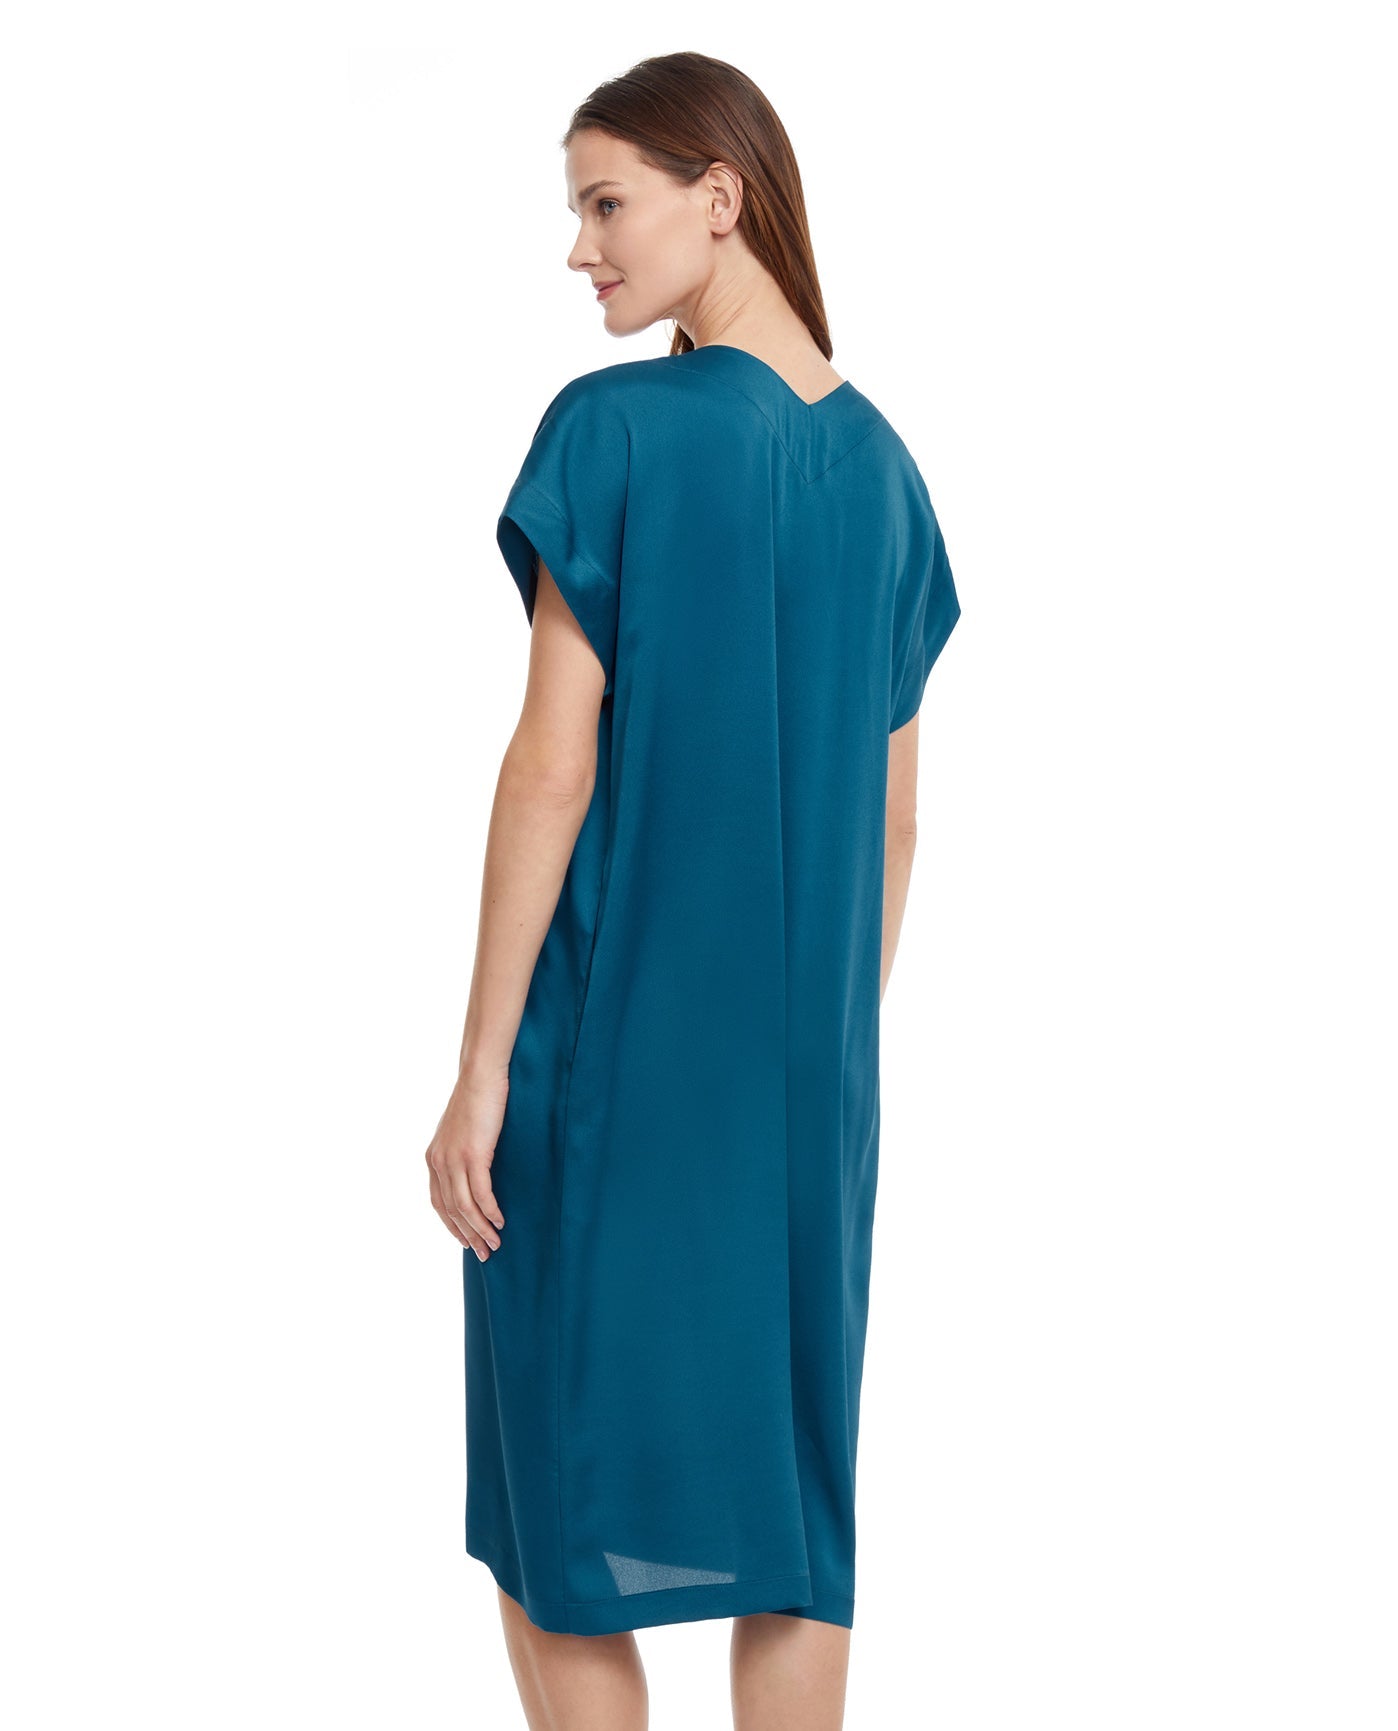 Back View Of Gottex Classic Golden Touch V-Neck Long Tunic | Gottex Golden Touch Teal